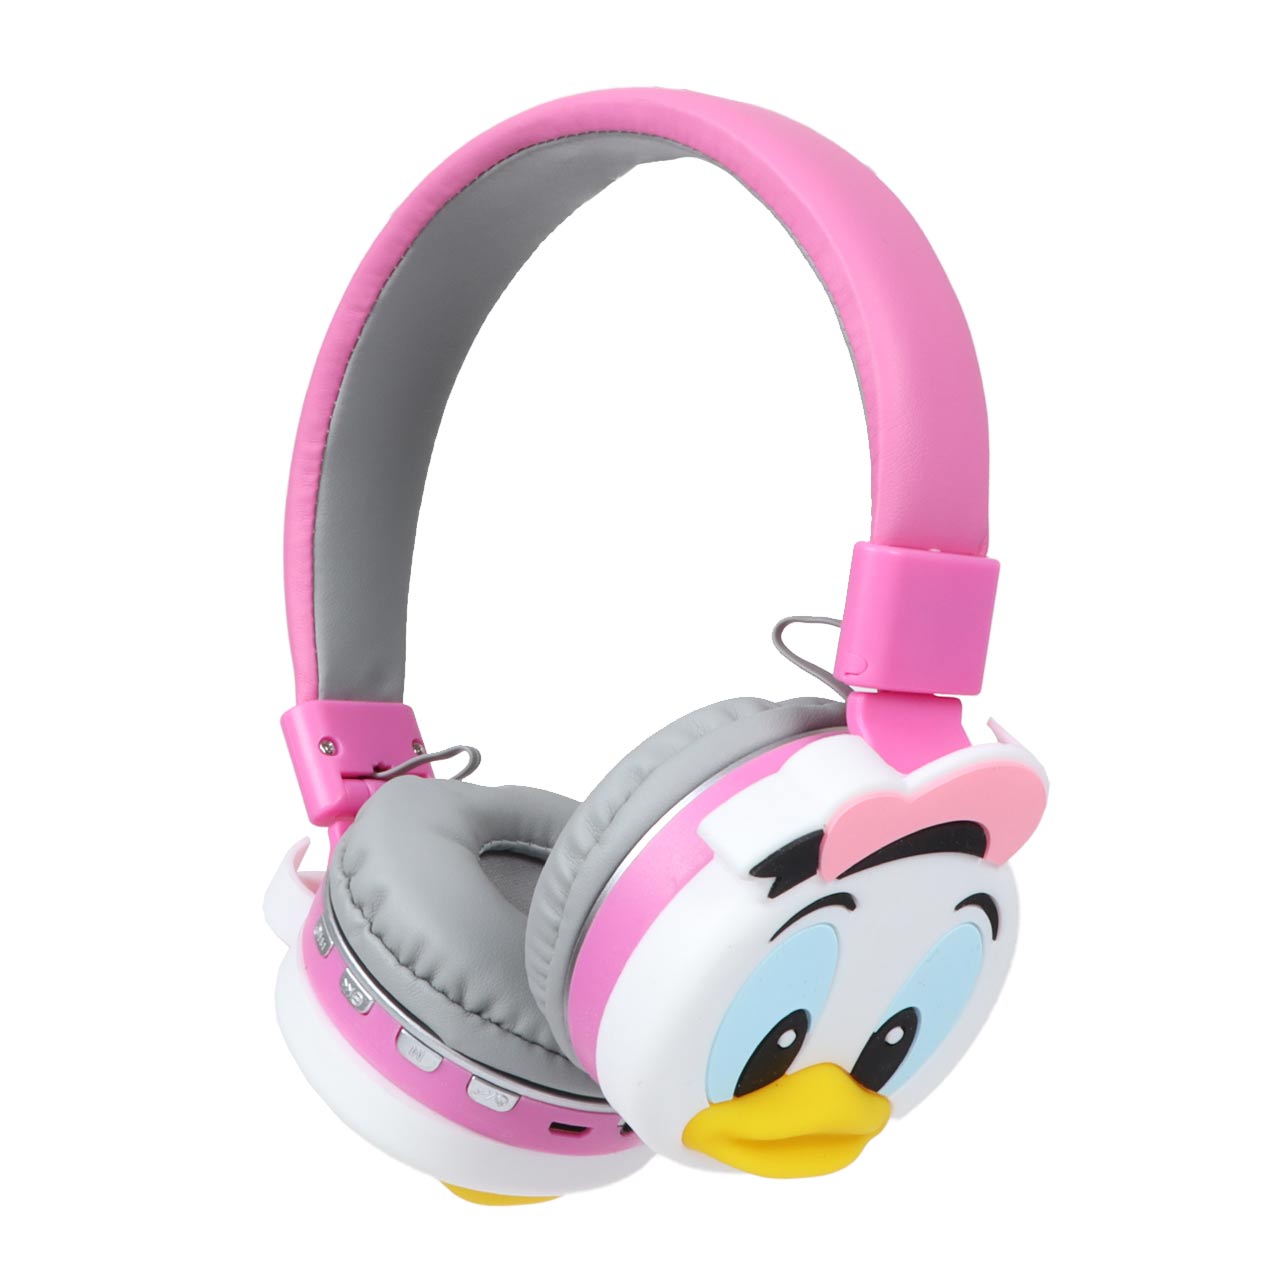 Wireless Bluetooth Headset Cartoon Lovely Pattern Stereo Foldable Earphone Online Class Headset With Microphone - Pink